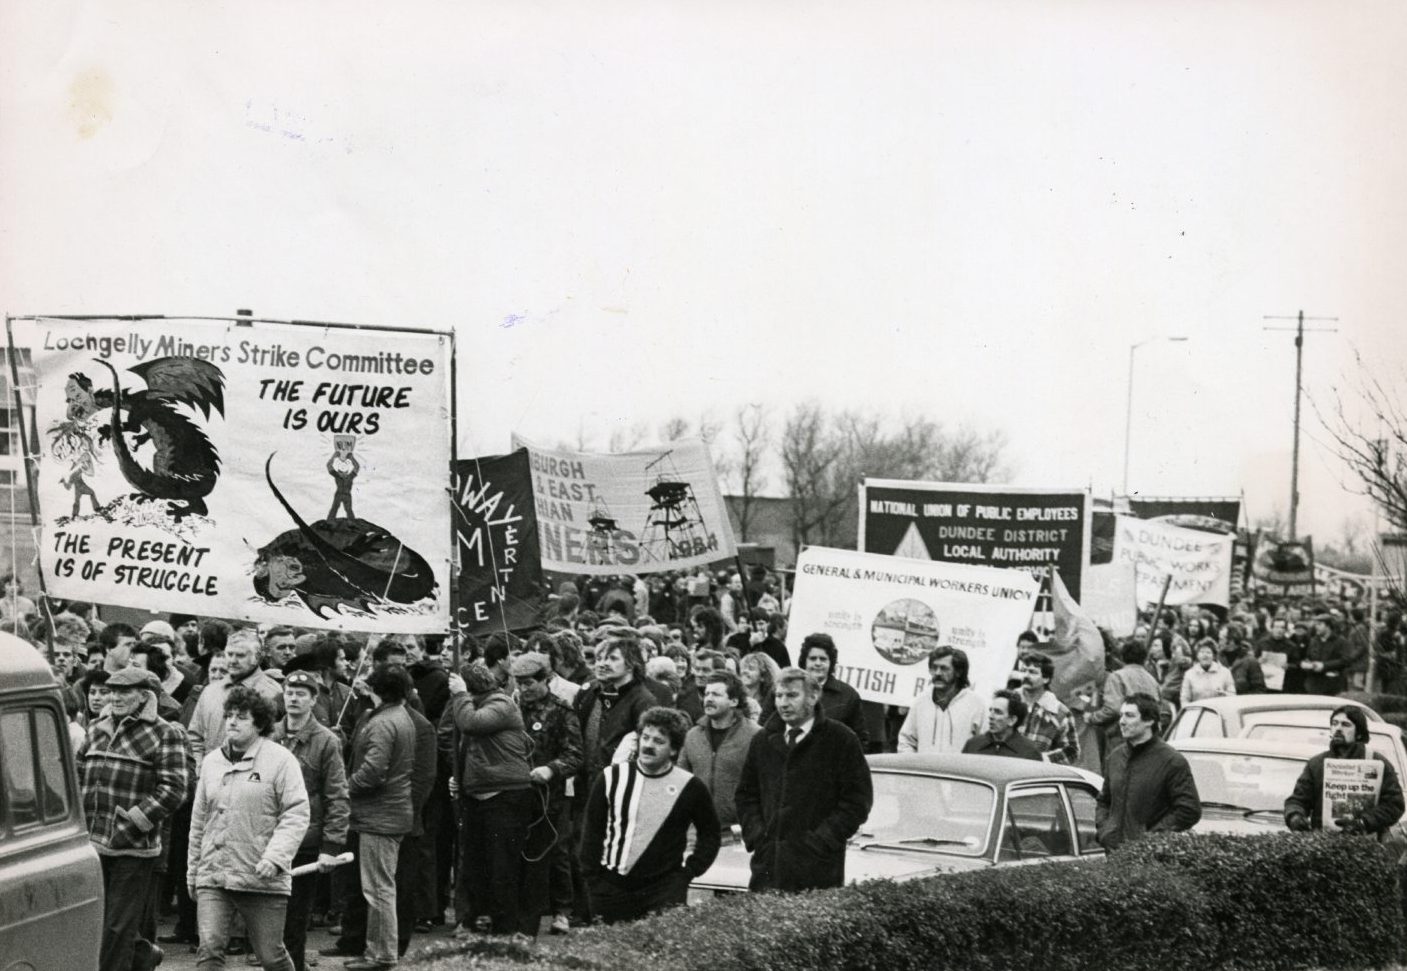 People march in the street in a union rally in Kirkcaldy in February 1985. 